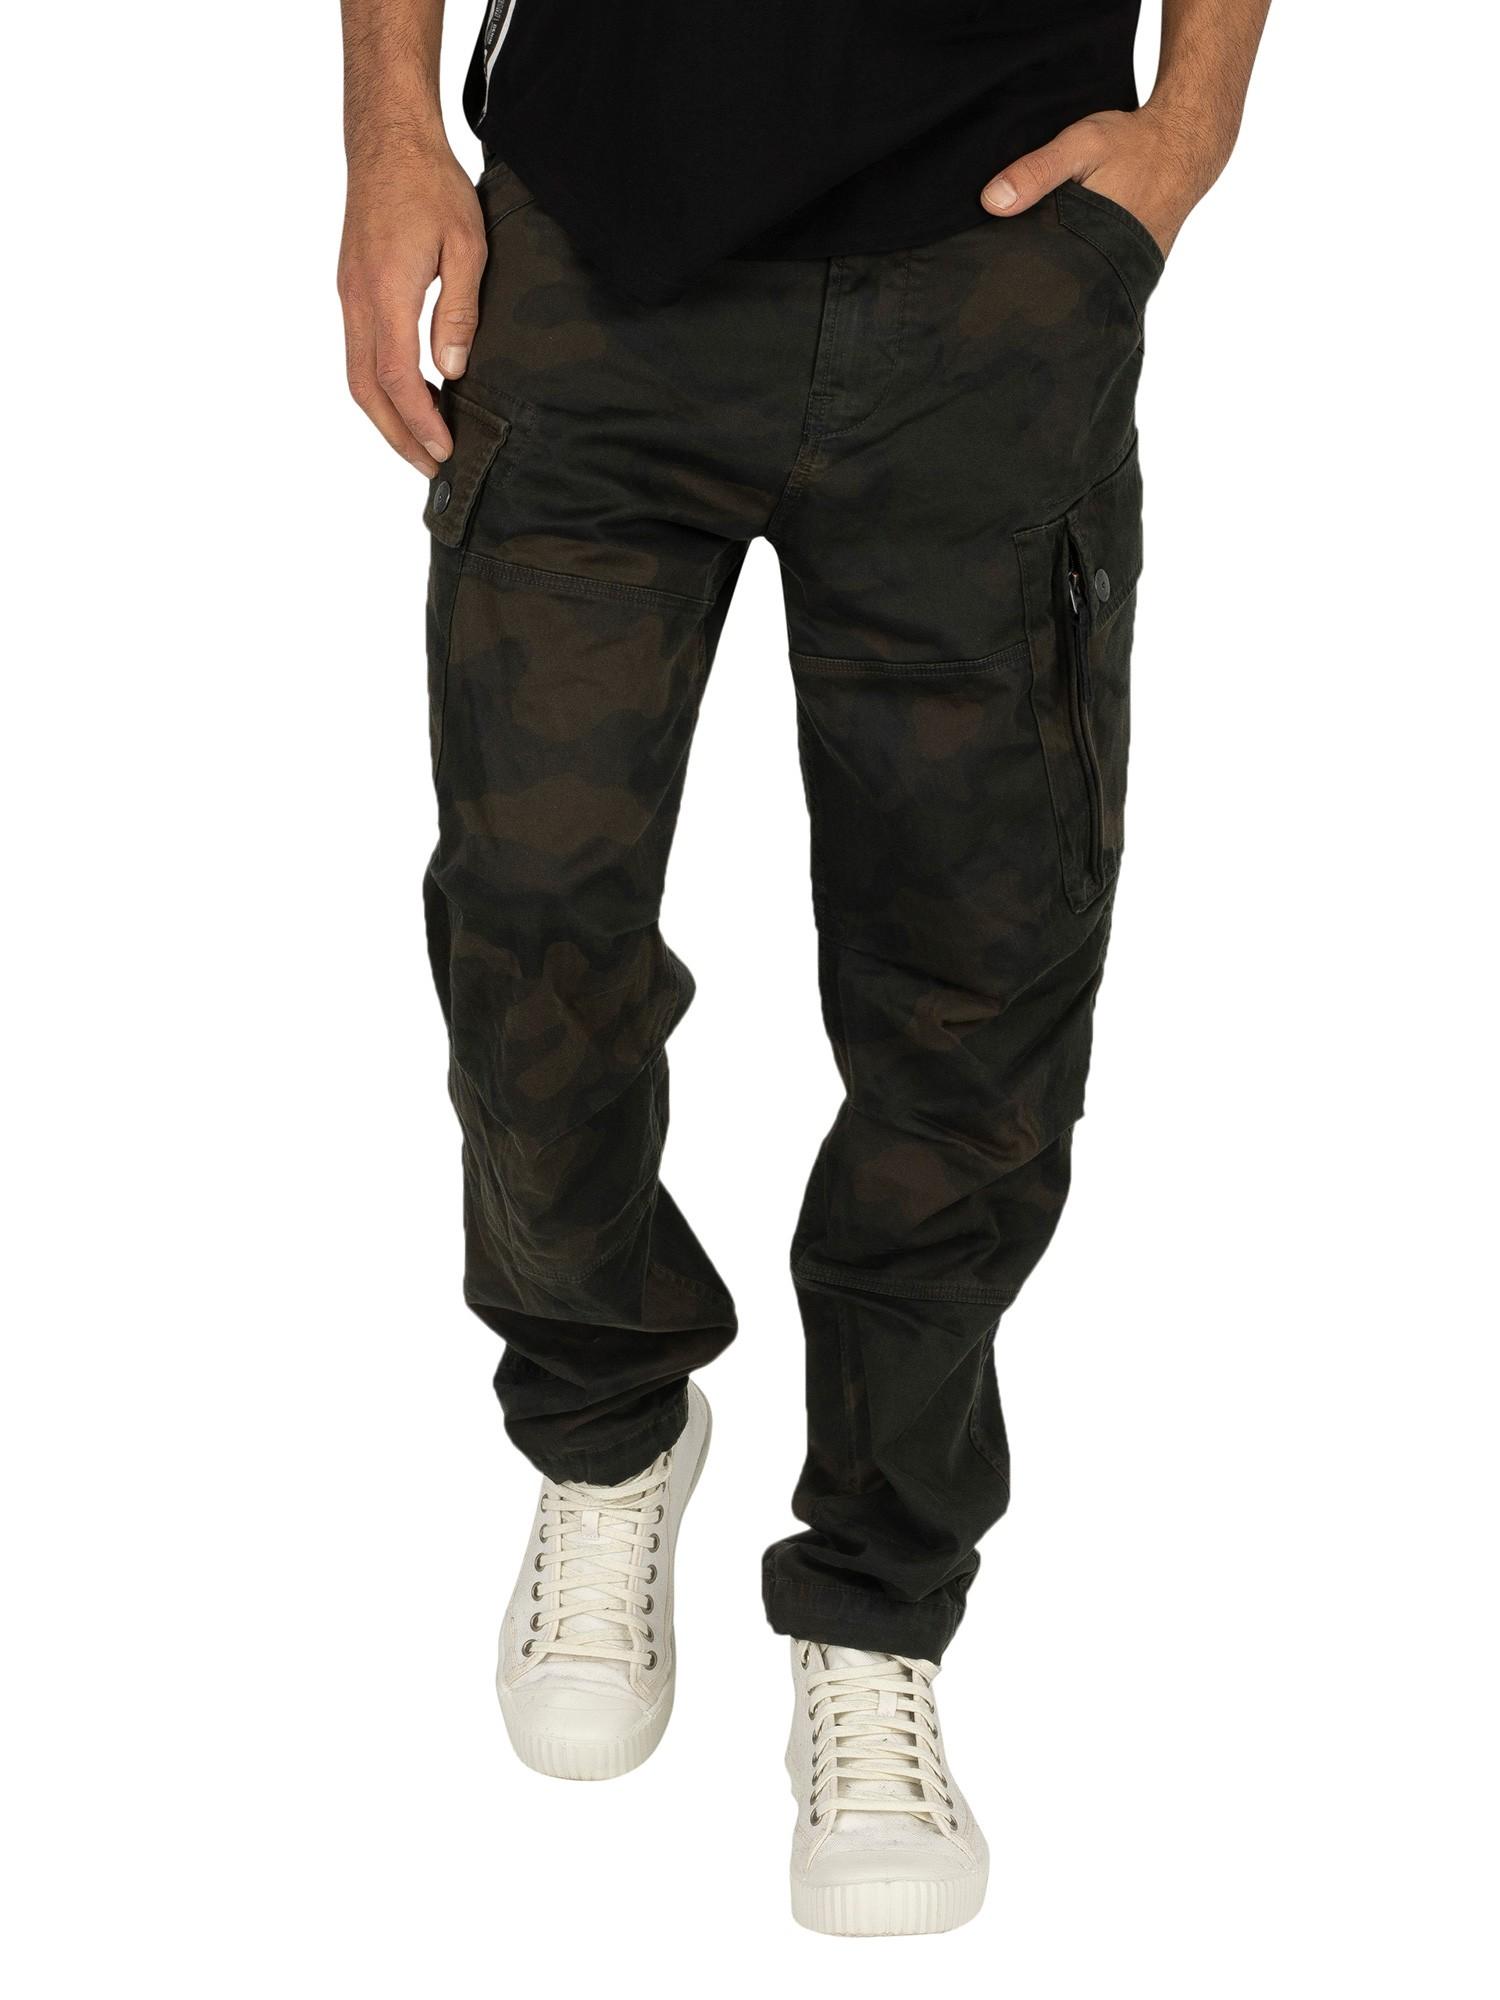 G-Star RAW Roxic Straight Tapered Cargos in Black for Men - Lyst